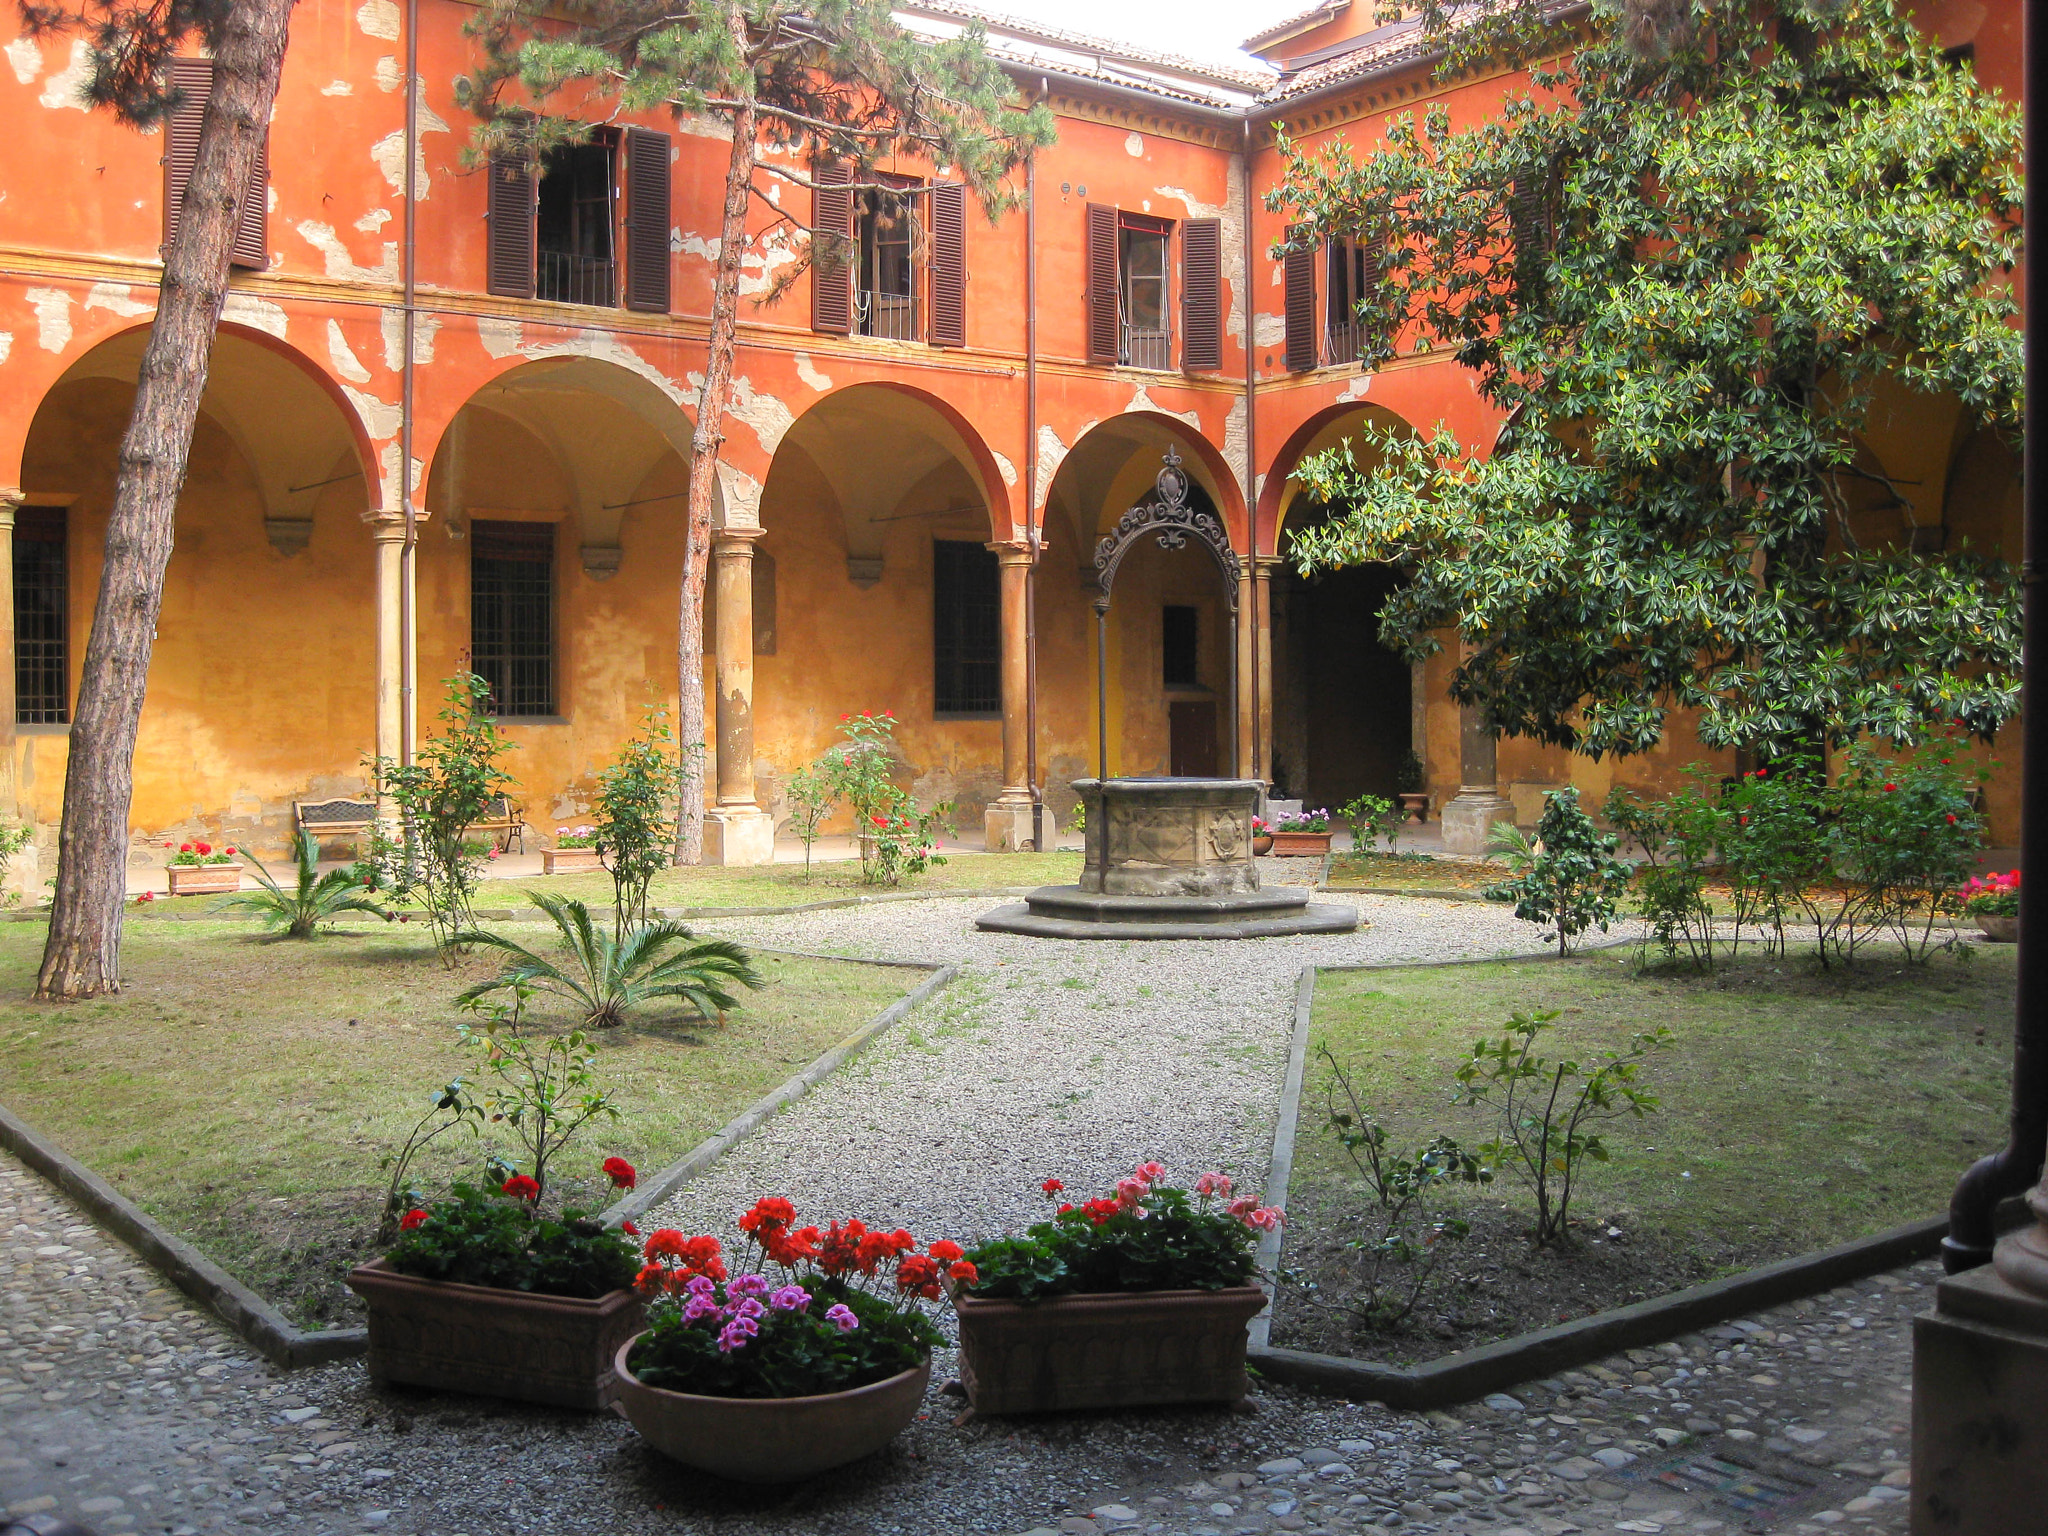 Canon PowerShot SD790 IS (Digital IXUS 90 IS / IXY Digital 95 IS) sample photo. Bologna (italy) - inner courtyard photography